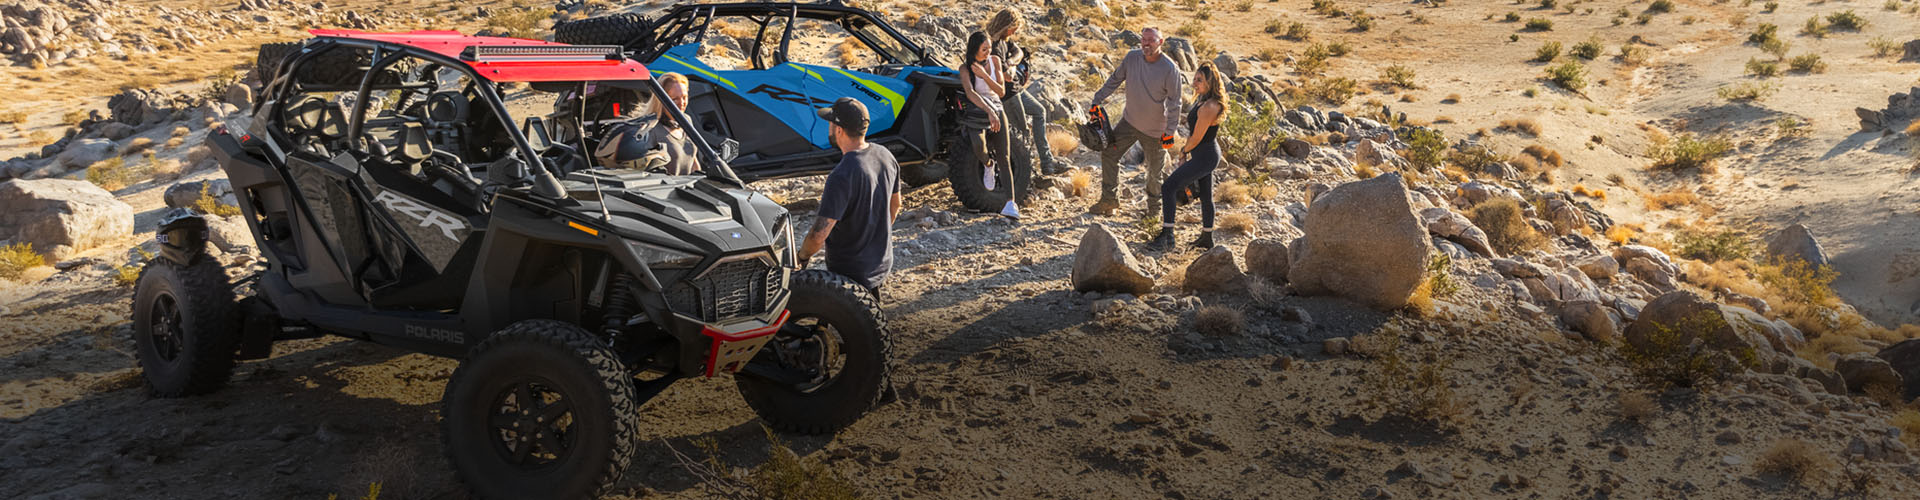 Recovery Gear 101 - Top 25 Off-Road Recovery Gear Essentials